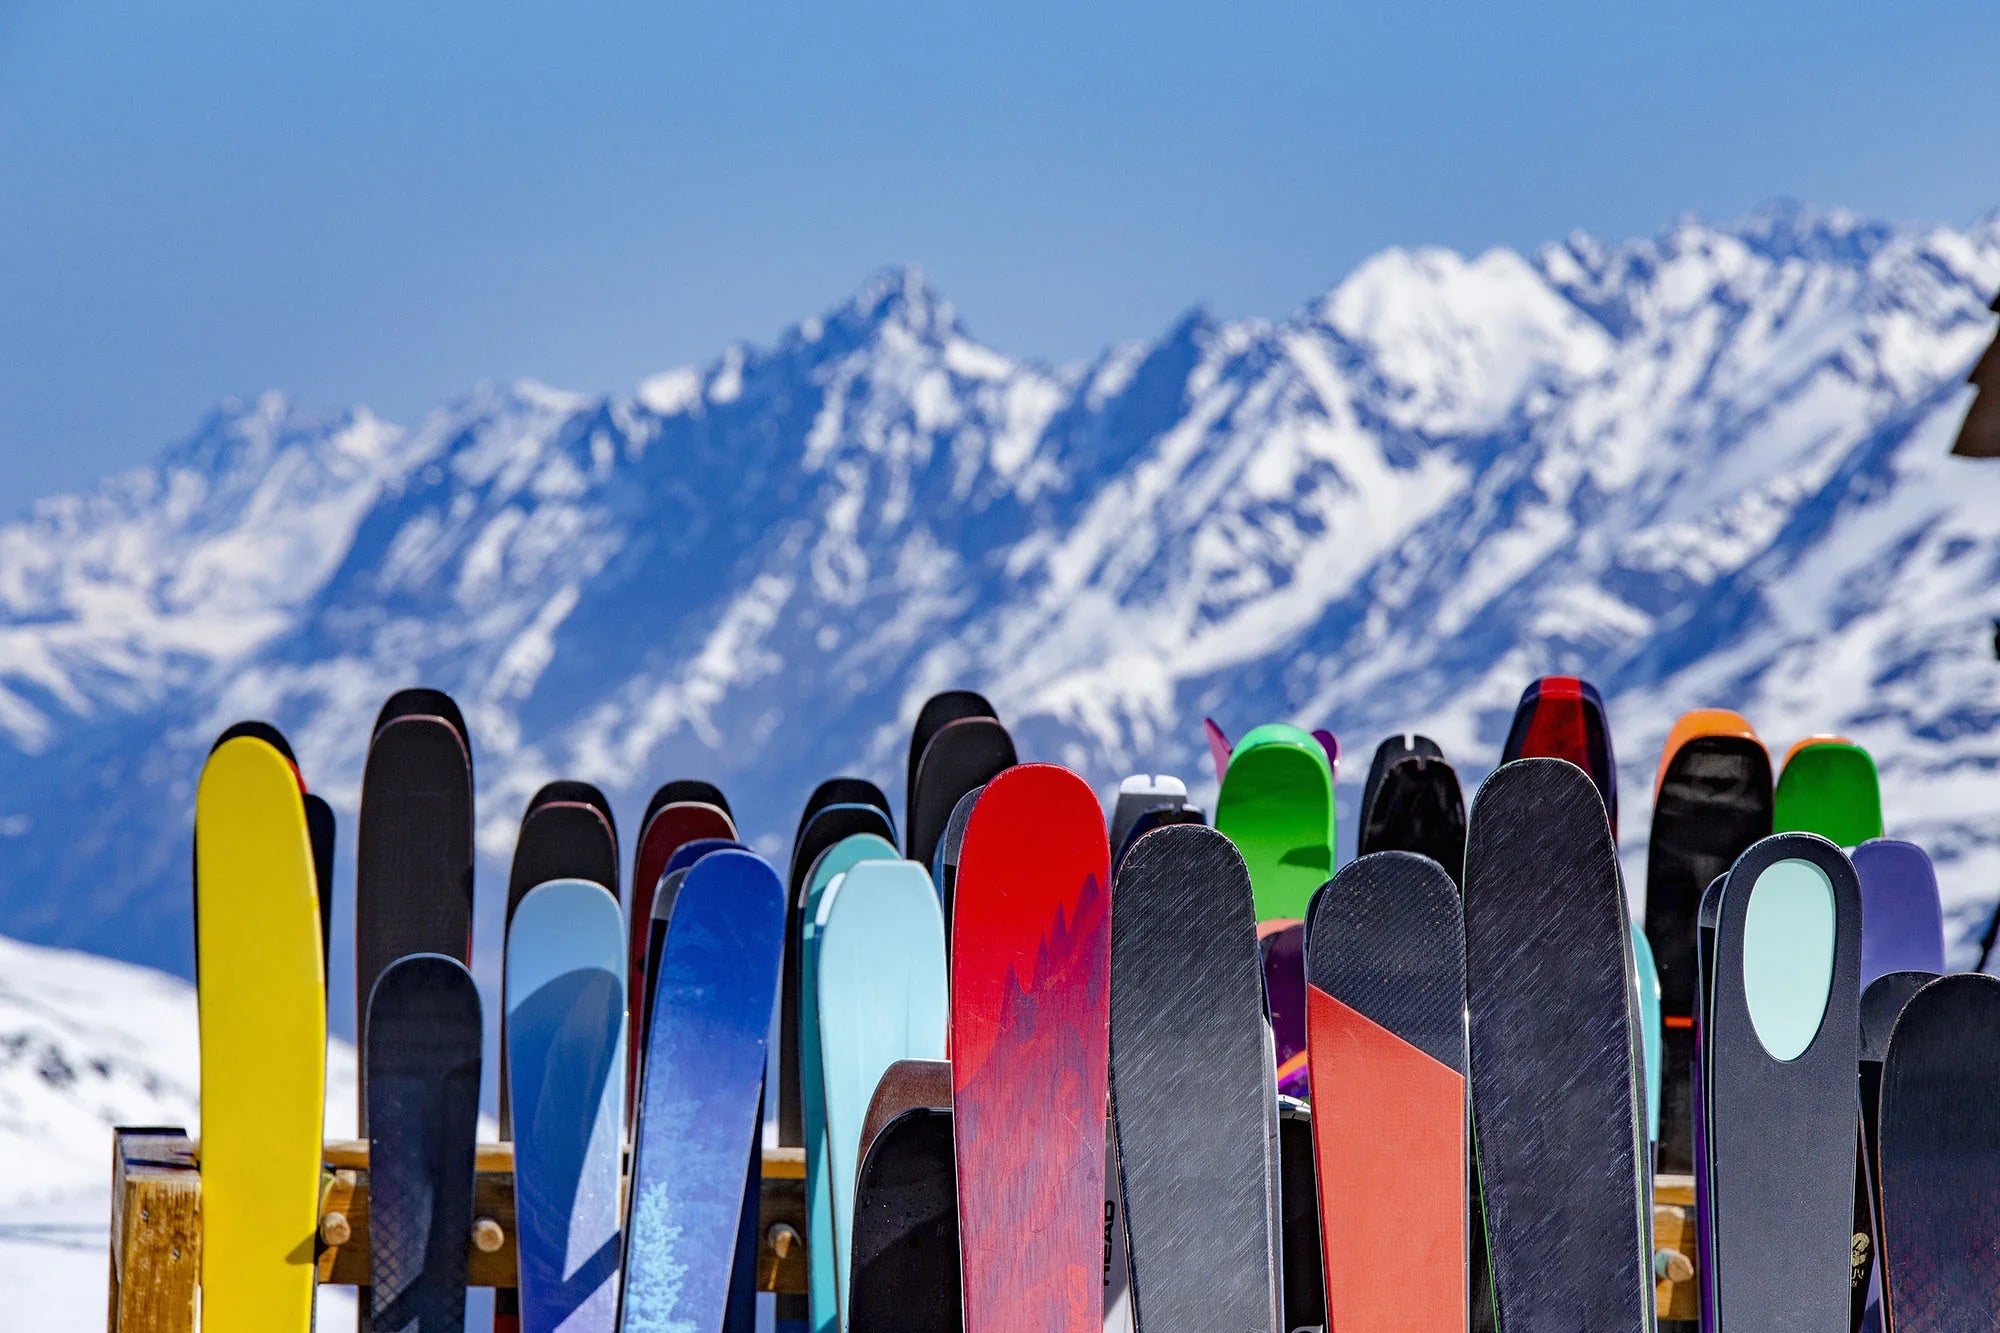 Colorful collection of skis on a ski rack with mountains in background